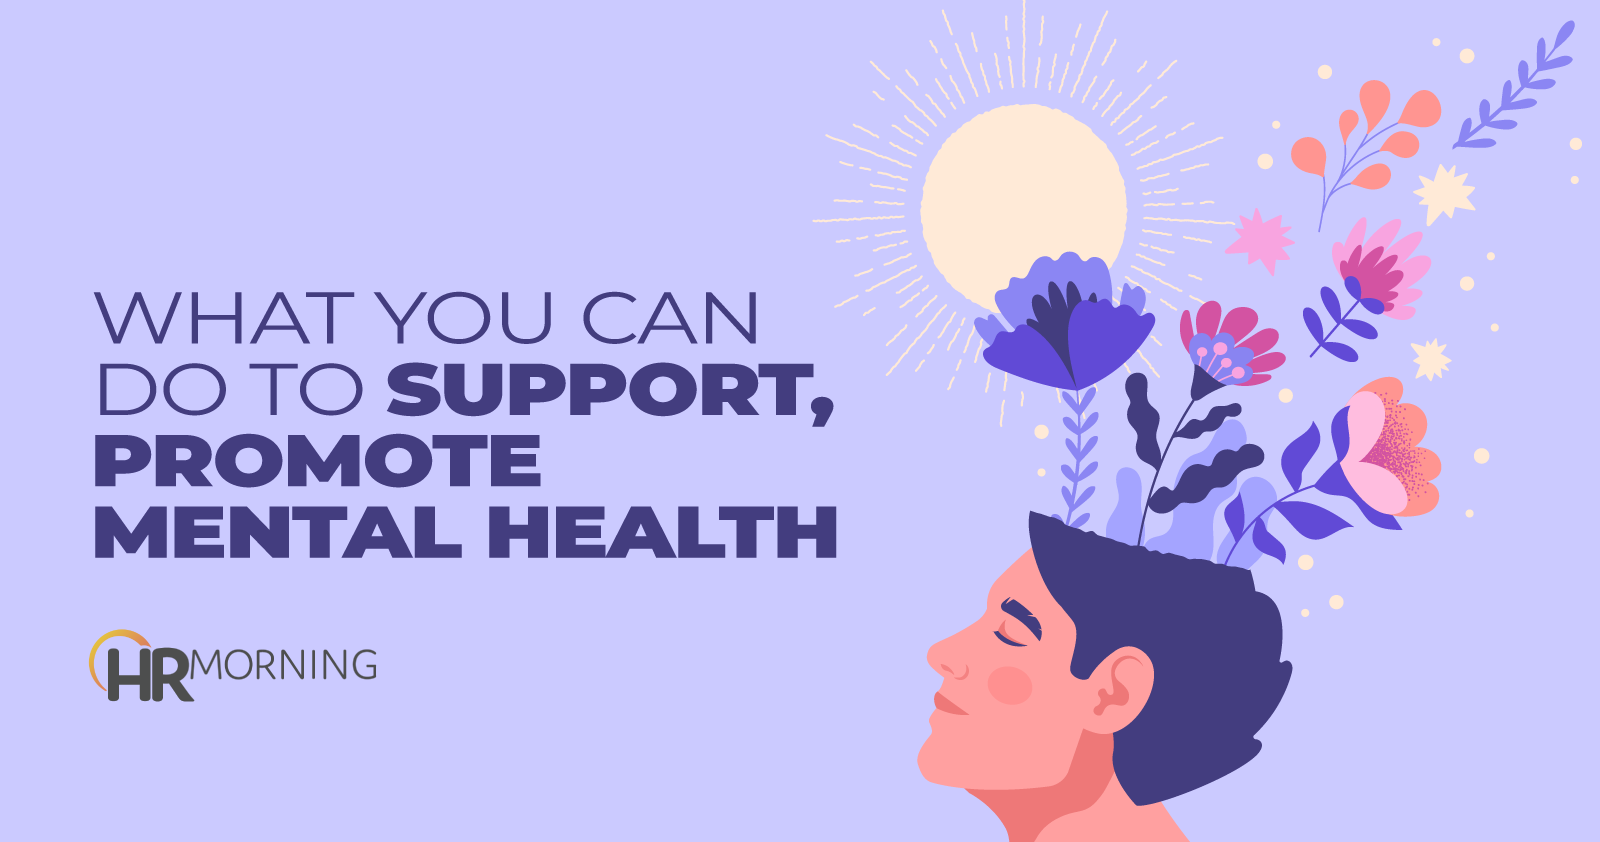 What you can do to support, promote mental health